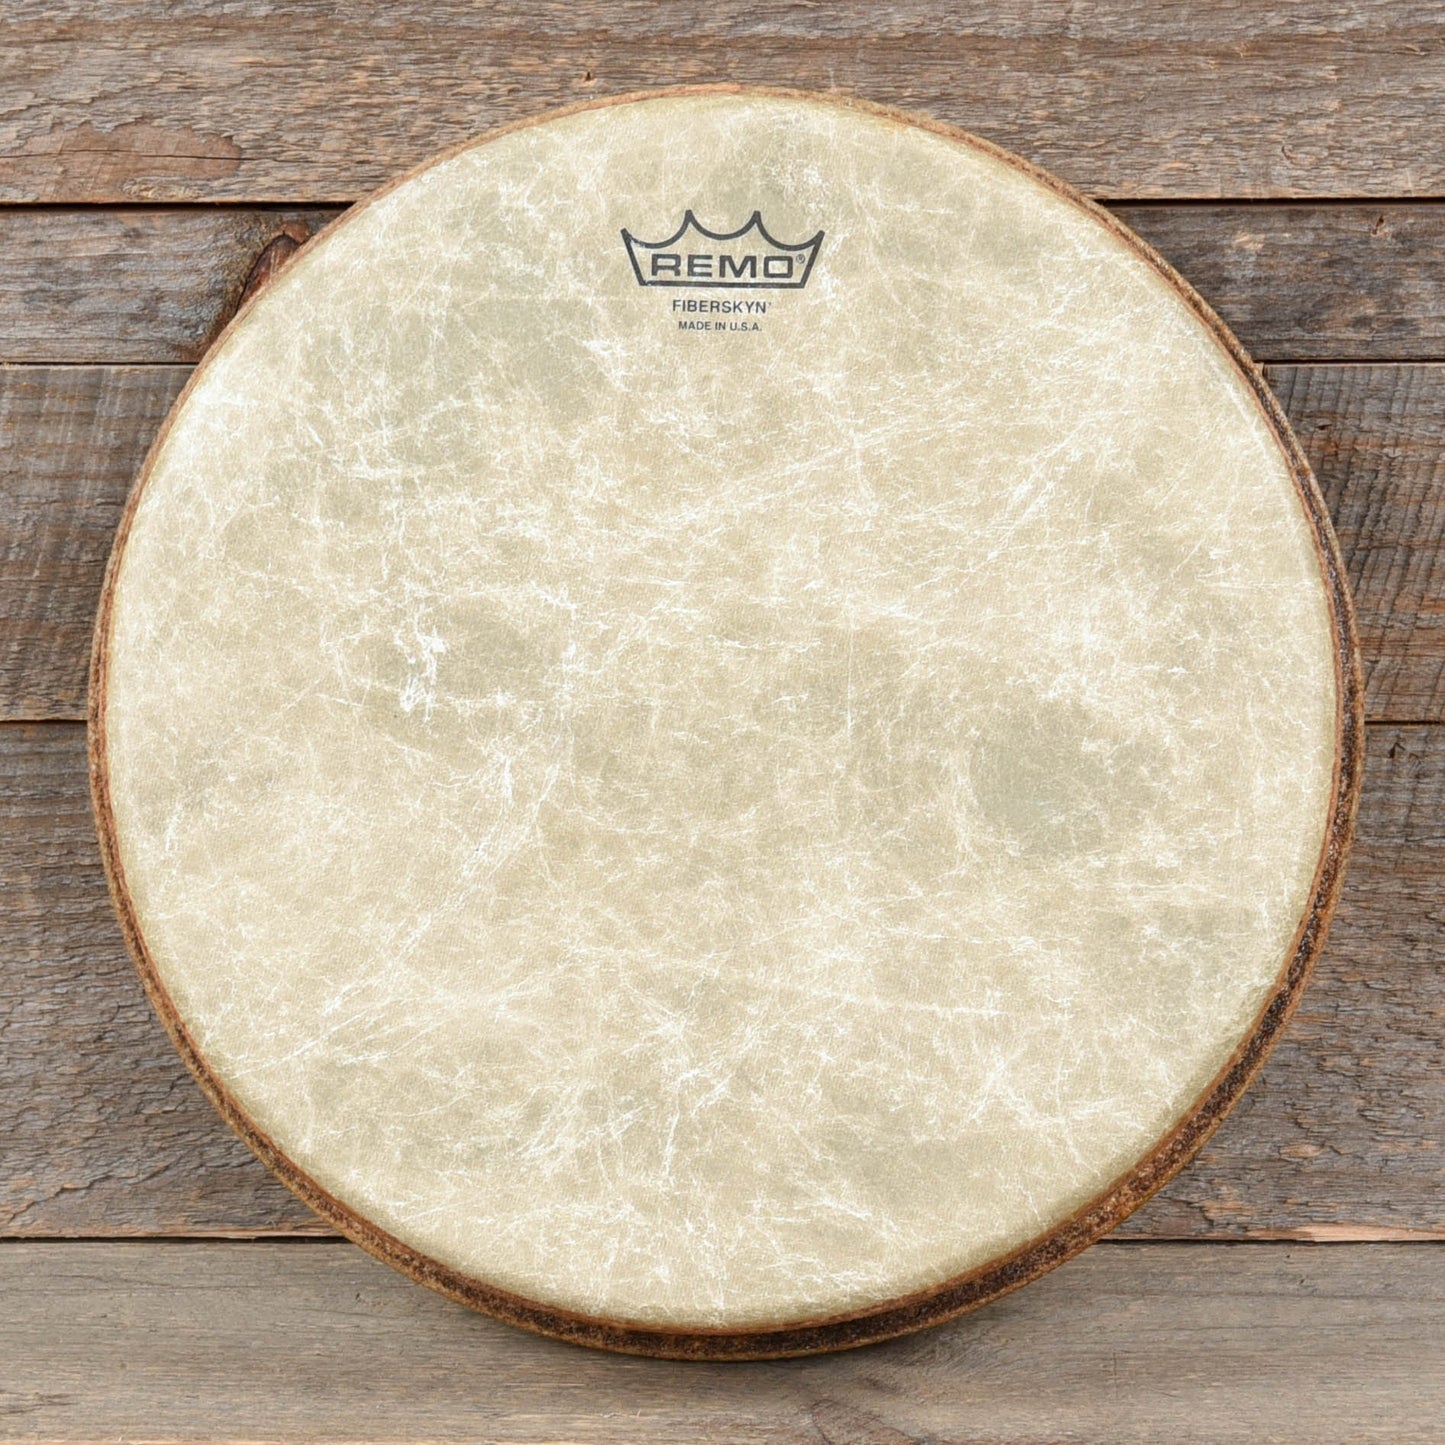 Remo 12" Mondo Fiberskyn Djembe Drumhead (FA Film, 2.5" Collar) Drums and Percussion / Parts and Accessories / Heads